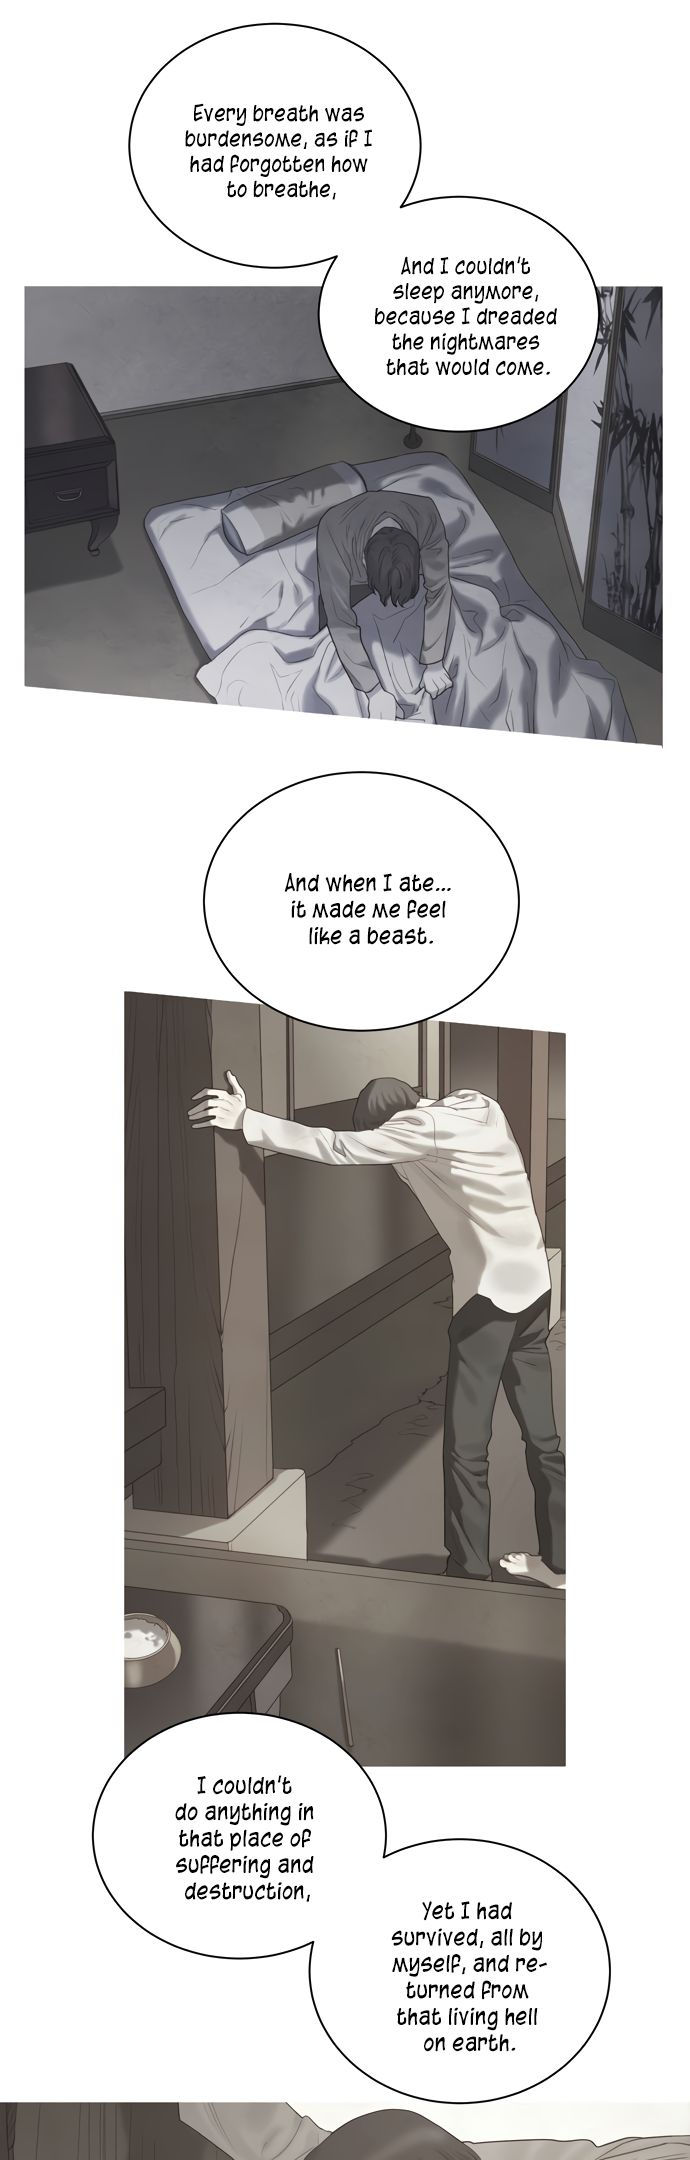 Gorae Byul - The Gyeongseong Mermaid - Chapter 23 Page 4